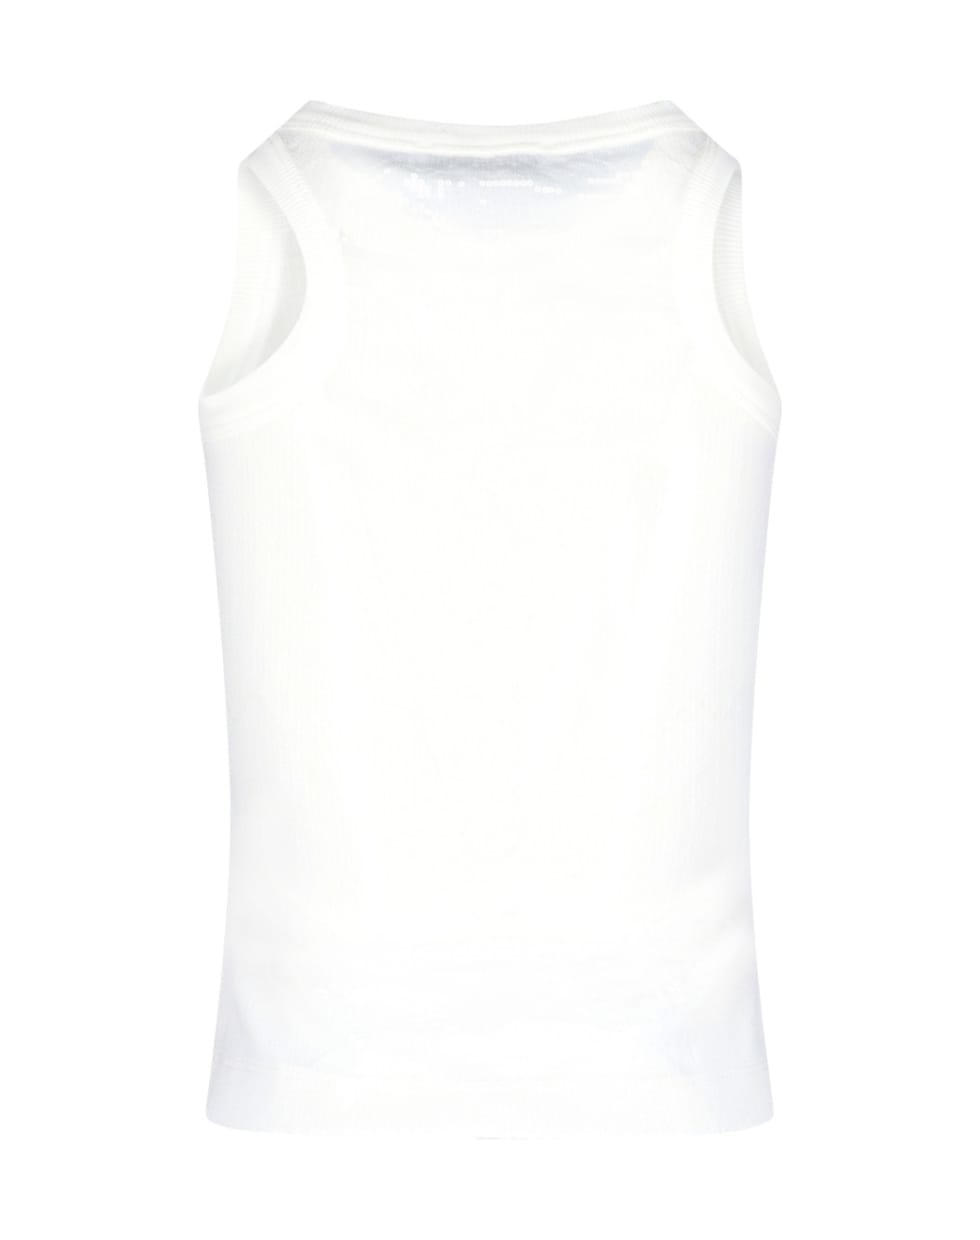 In The Mood For Love Top - White